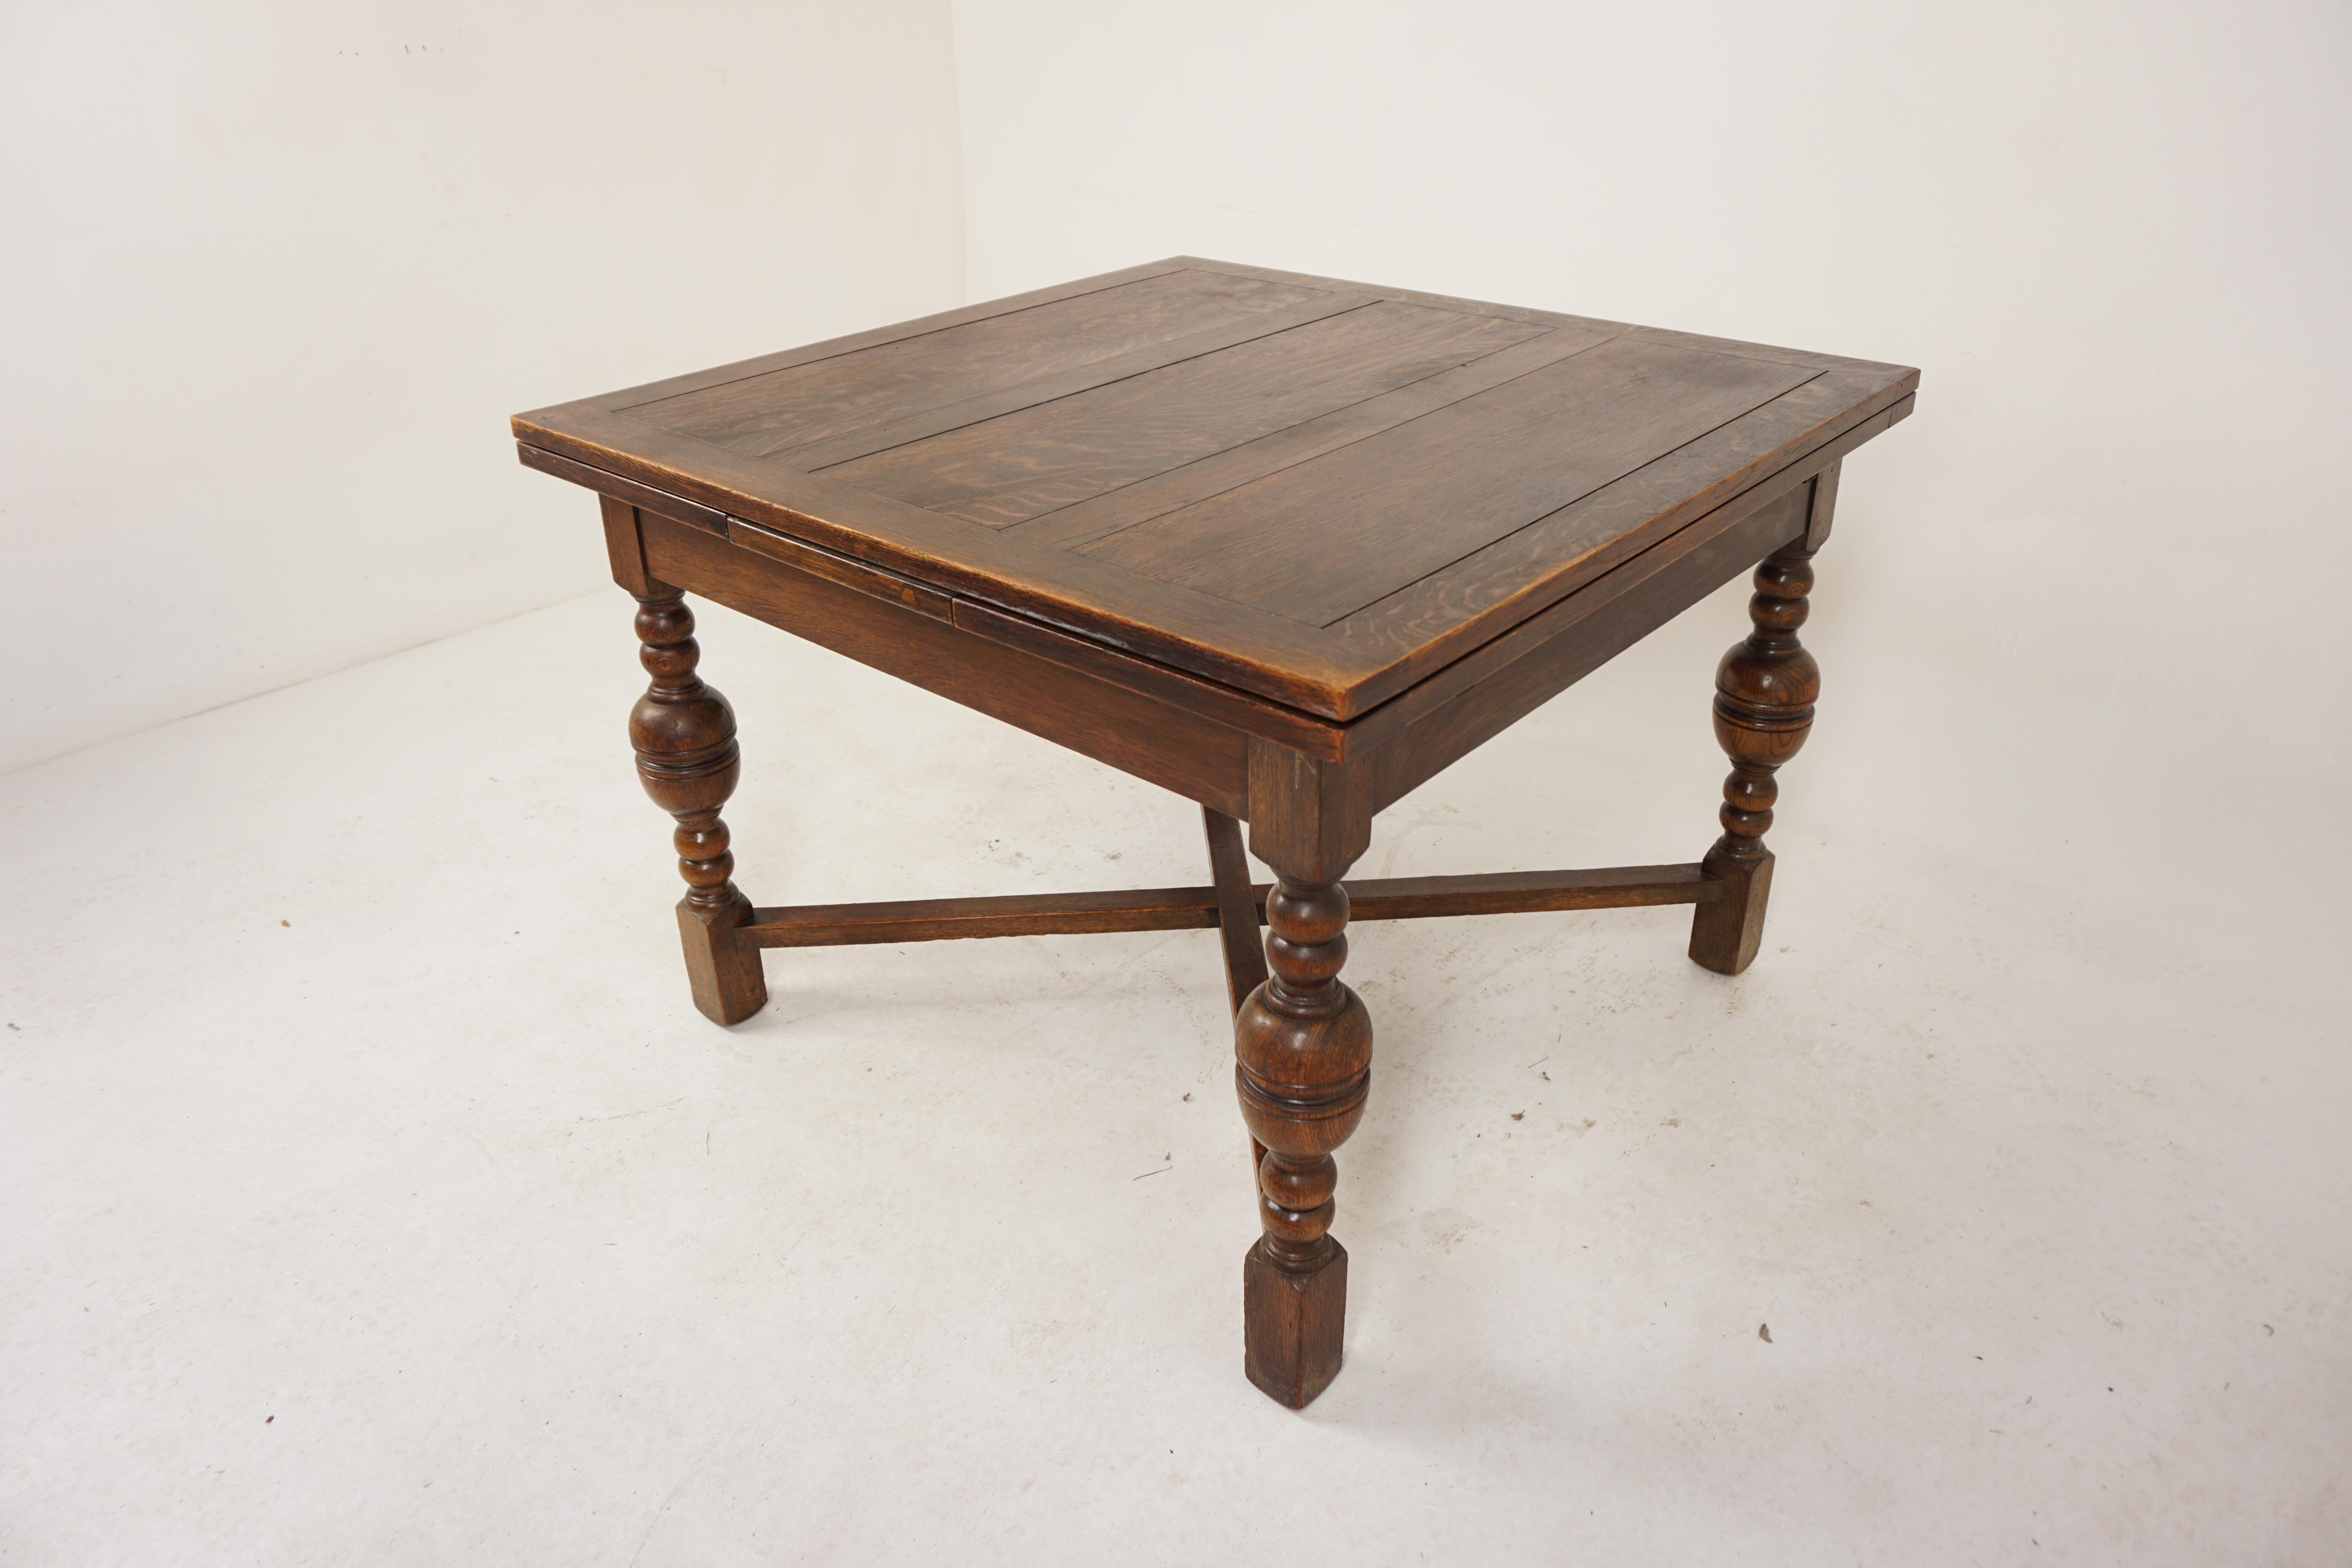 Vintage Tiger Oak Refectory Table, Draw Leaf, Pull Out Table, Scotland 1920, H899

Scotland 1920
Solid Oak
Original Finish
Solid Panelled Oak Top
Above two pull out ends
Raised upon heavy turned bulbous legs
United by a heavy x stretcher on the